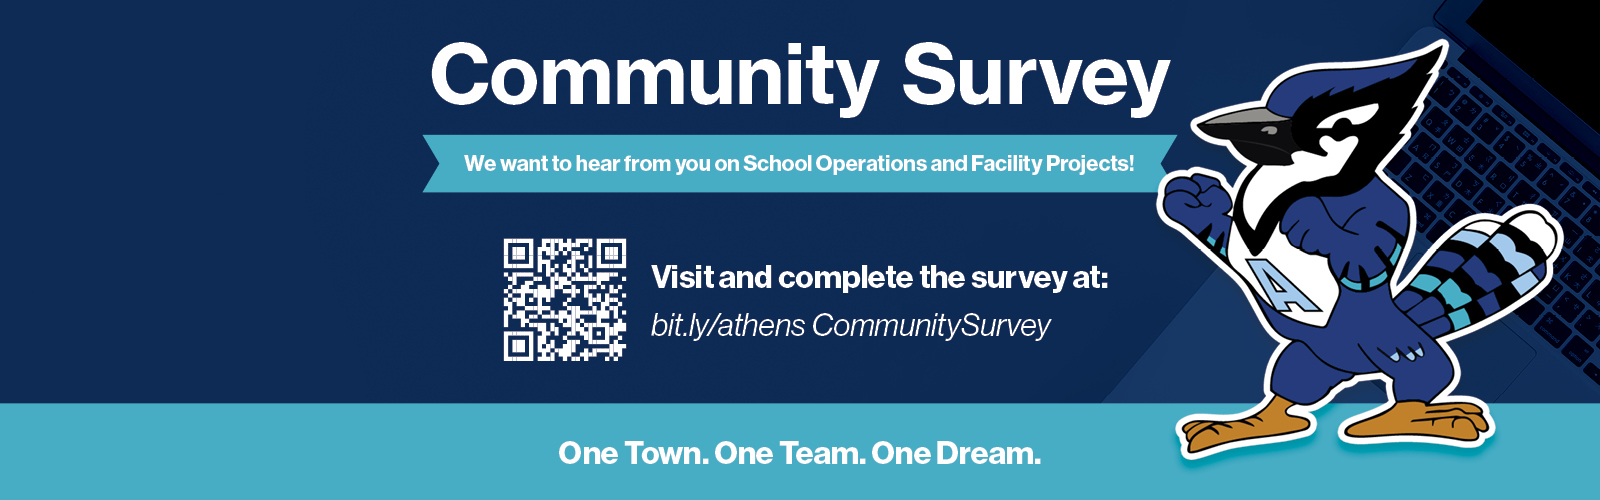 Community Survey - we want to hear from you on school operations and facility projects! visit and complete the survey at bit.ly/athenscommunitysurvey